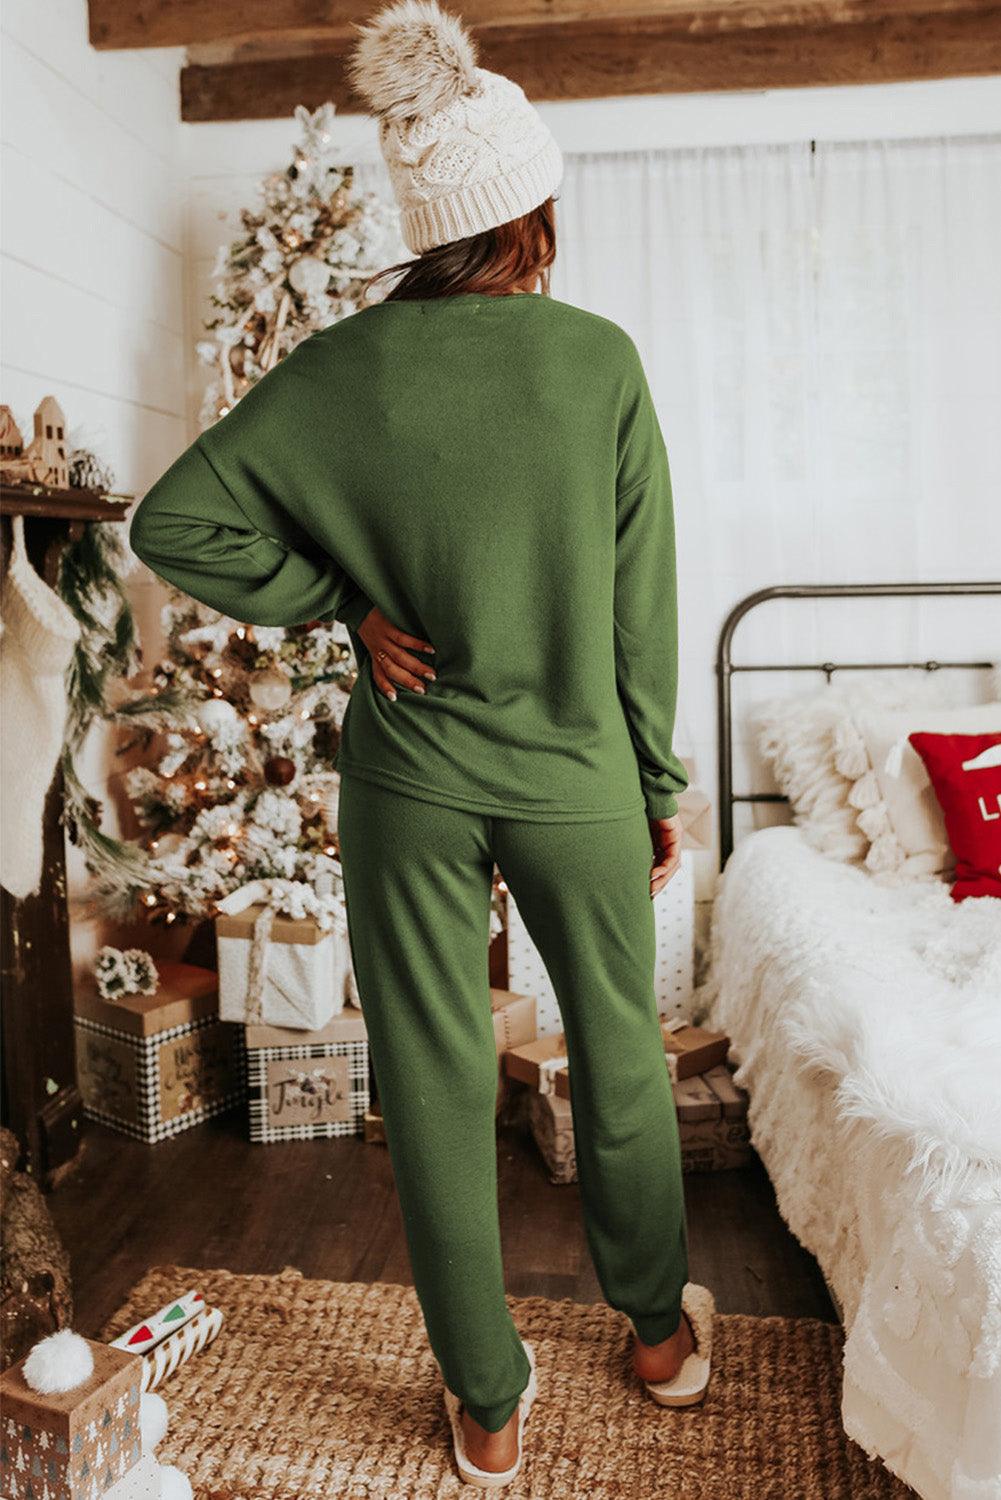 Spinach Green Sequined Christmas Cane Pattern Lounge Sweatsuit - L & M Kee, LLC